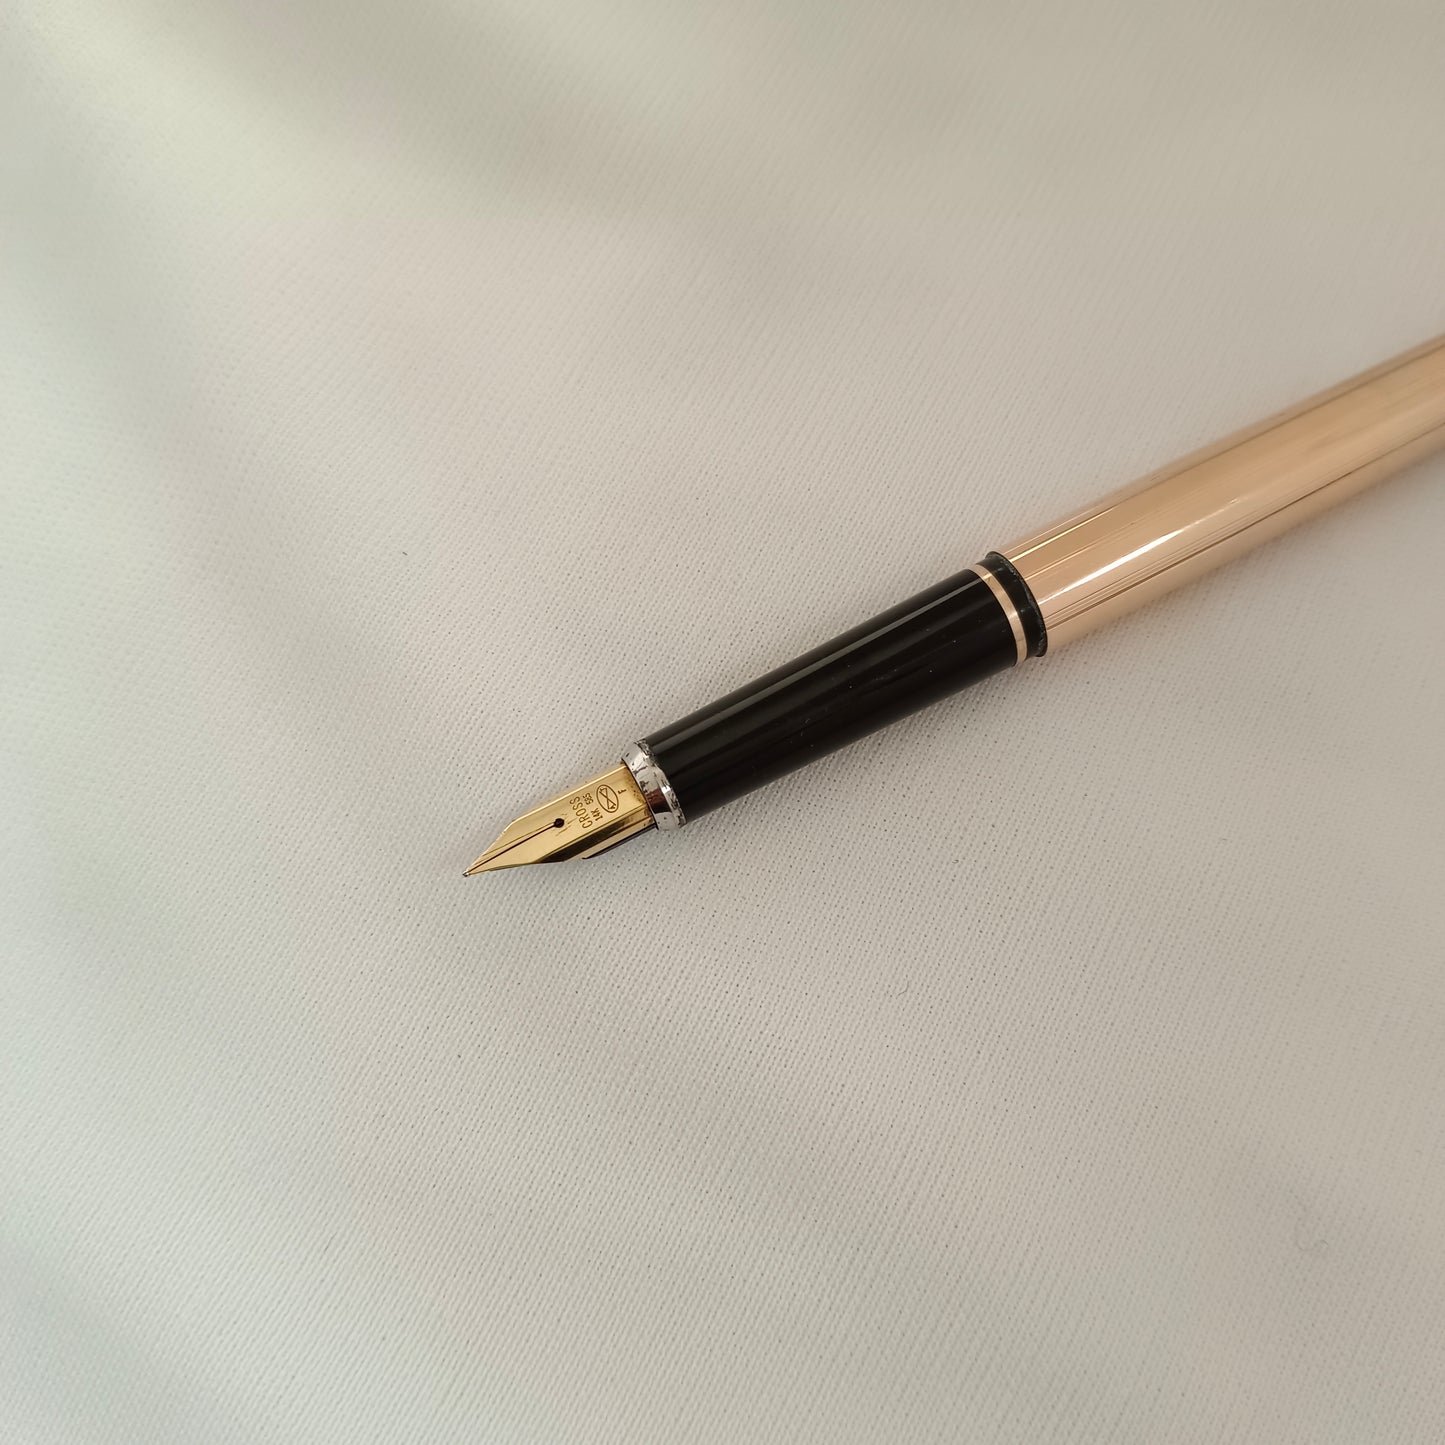 Cross Century 1/20 14kt Rolled Gold Fountain Pen - Made in Ireland